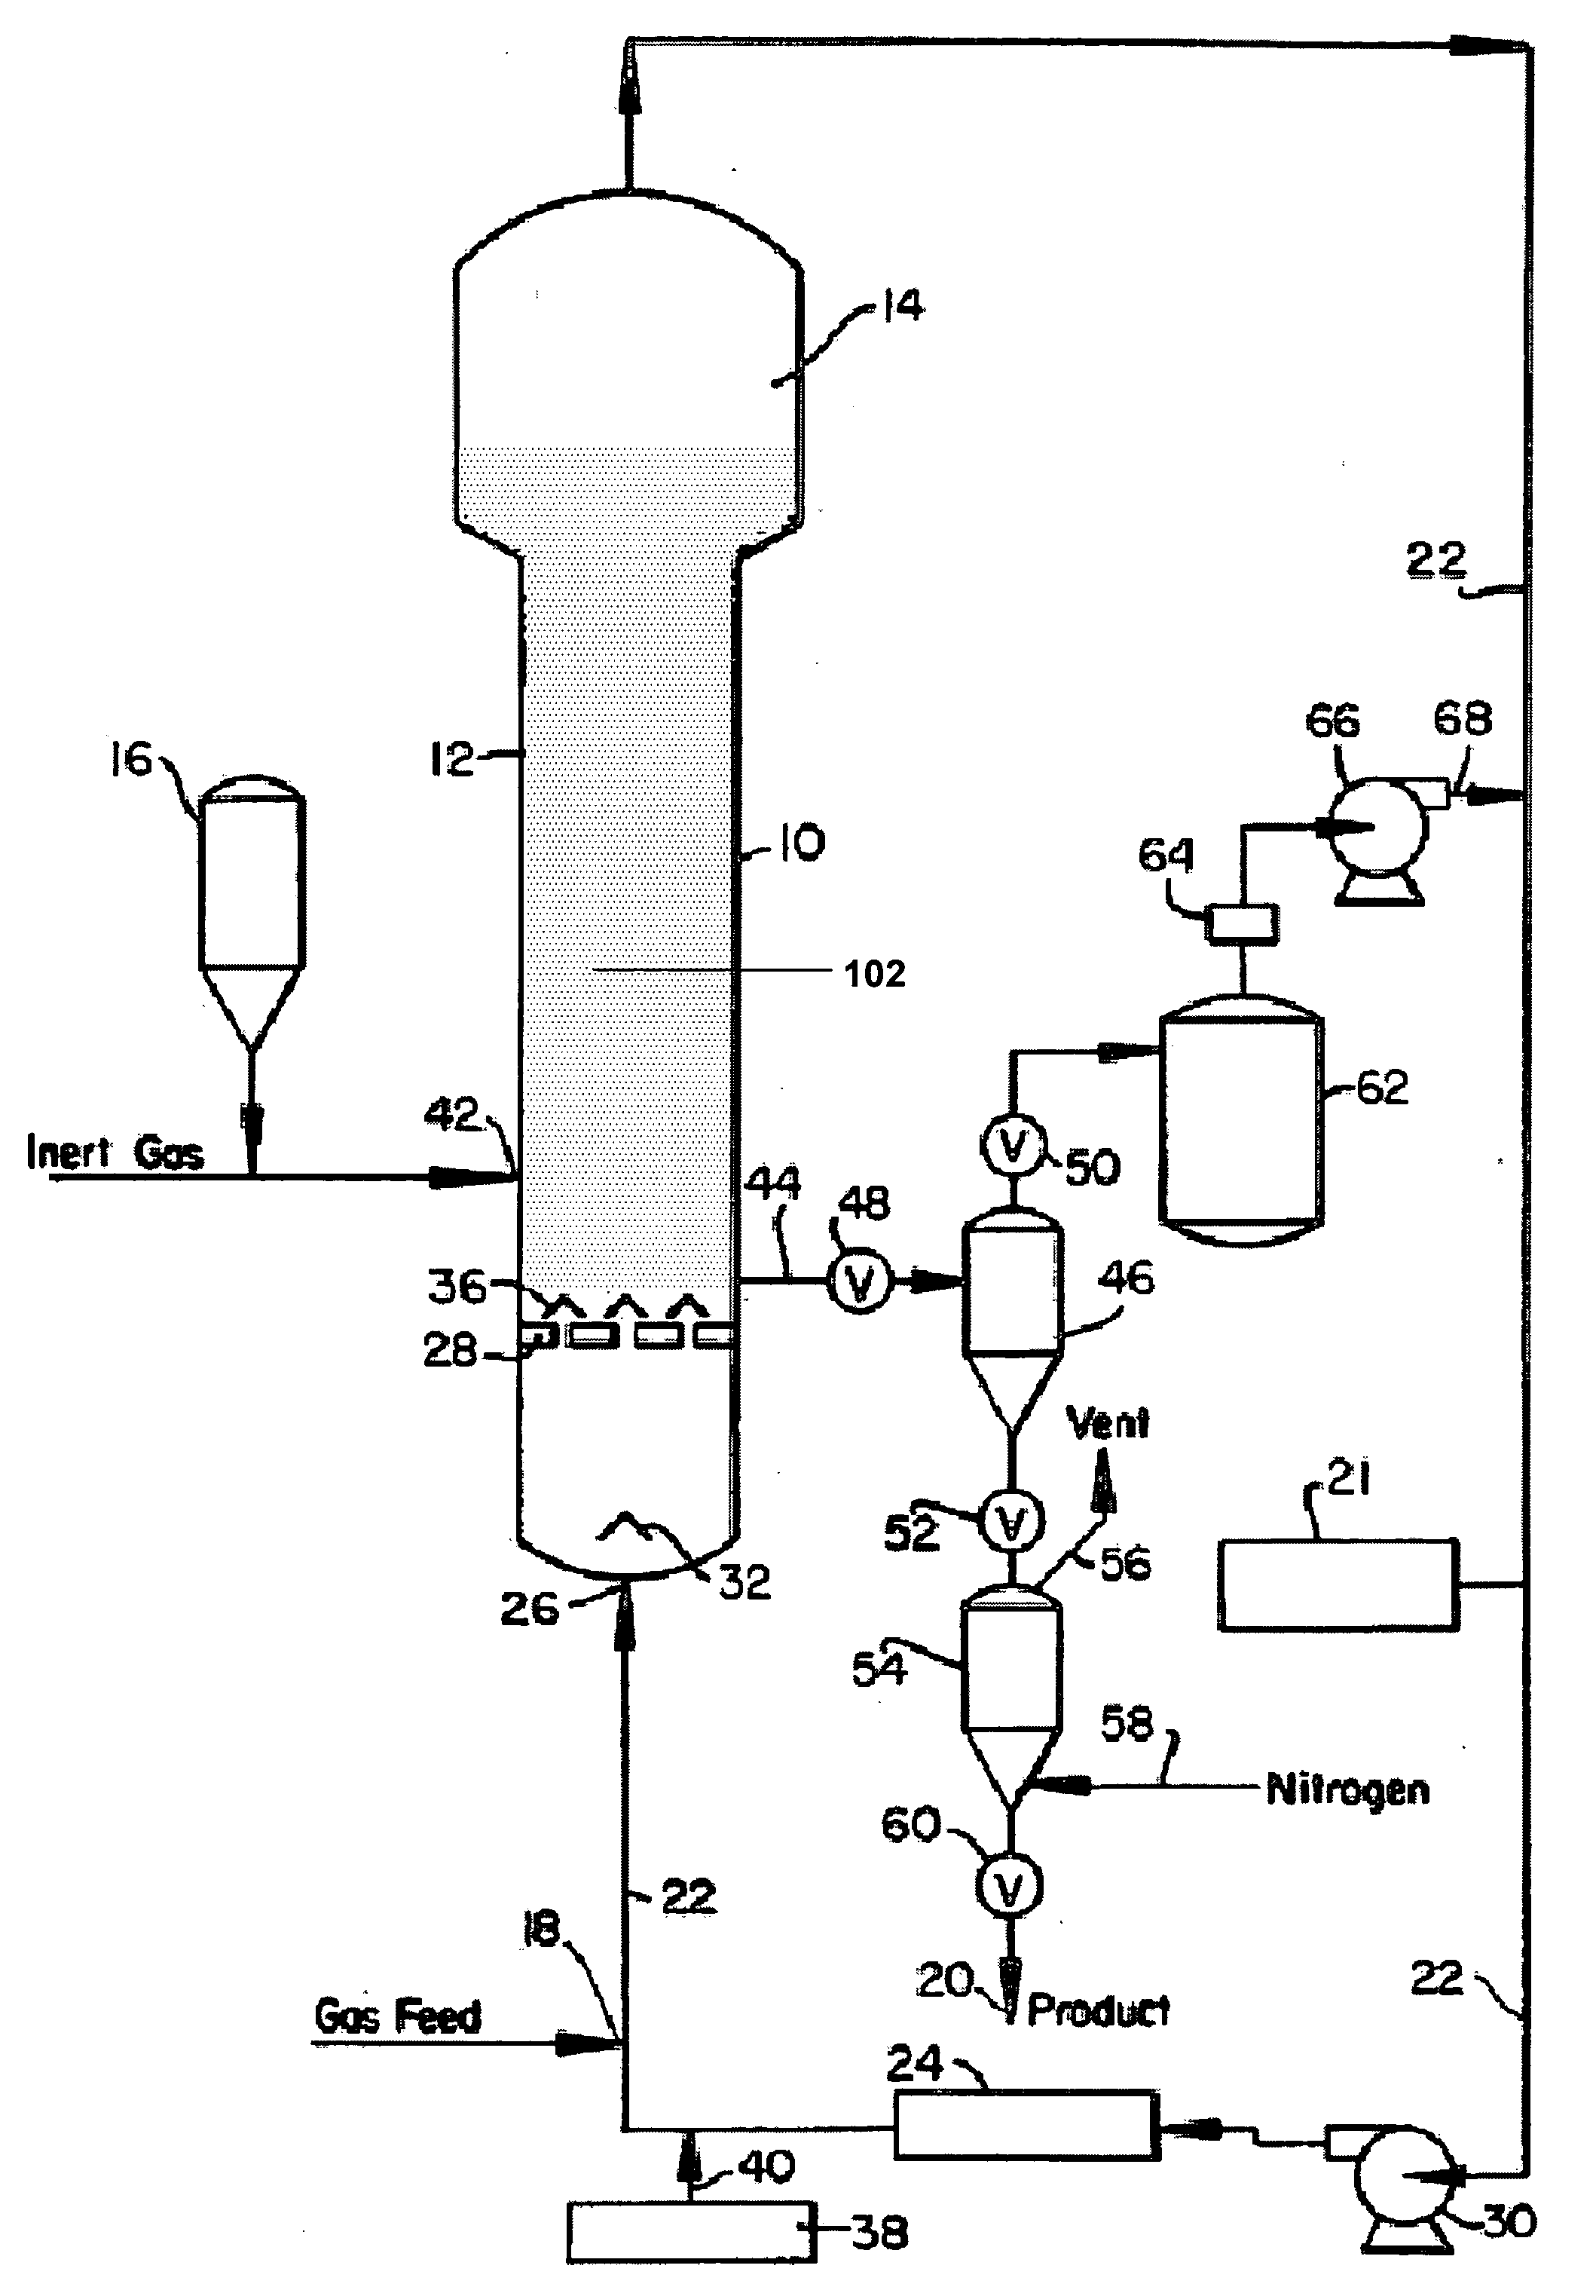 Condensing mode operation of gas-phase polymerization reactor